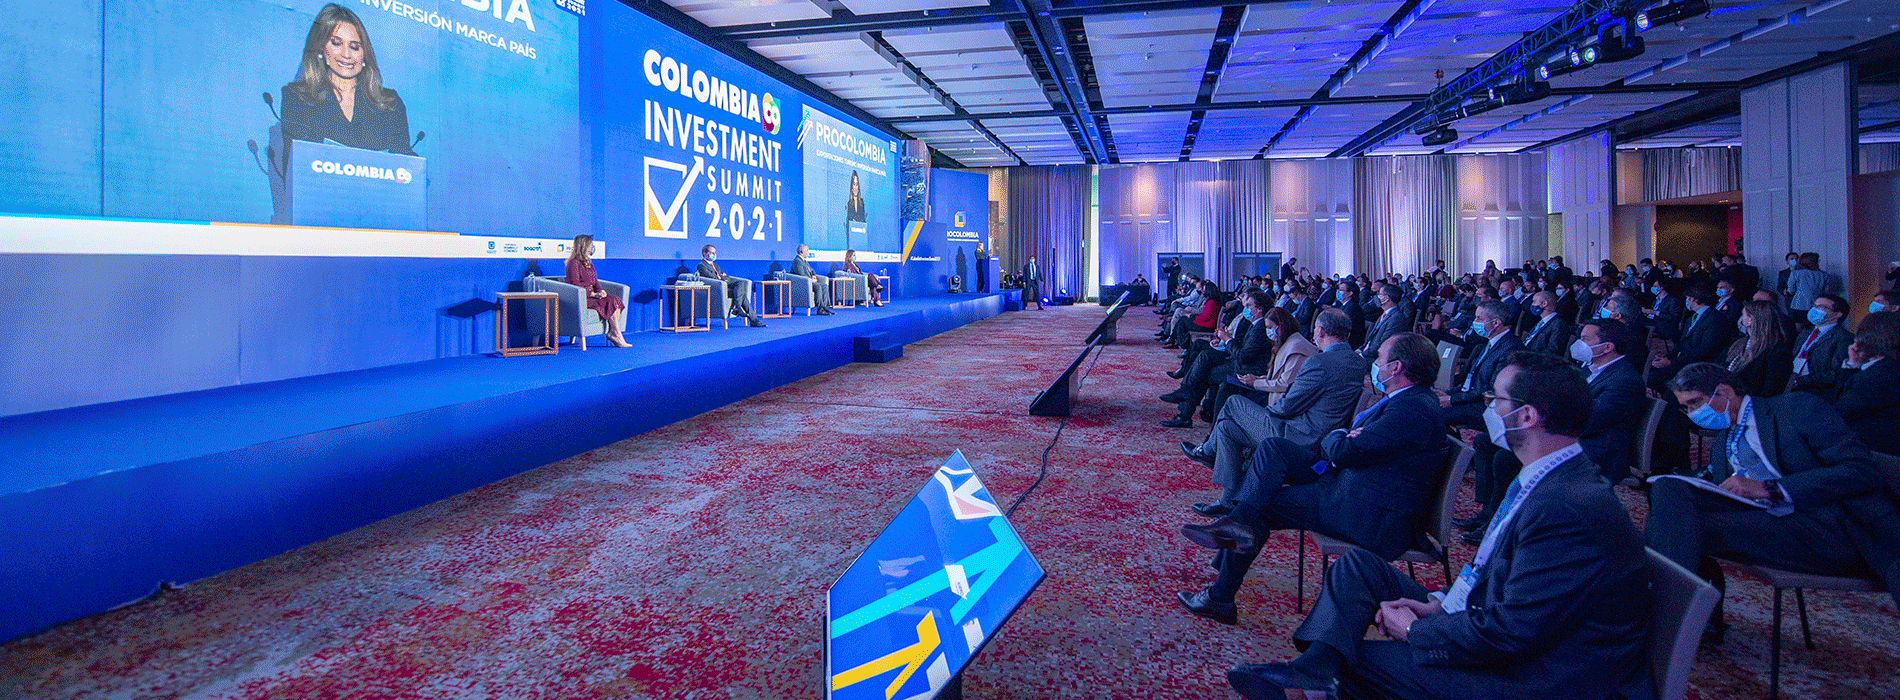 Colombia Investment Summit 202